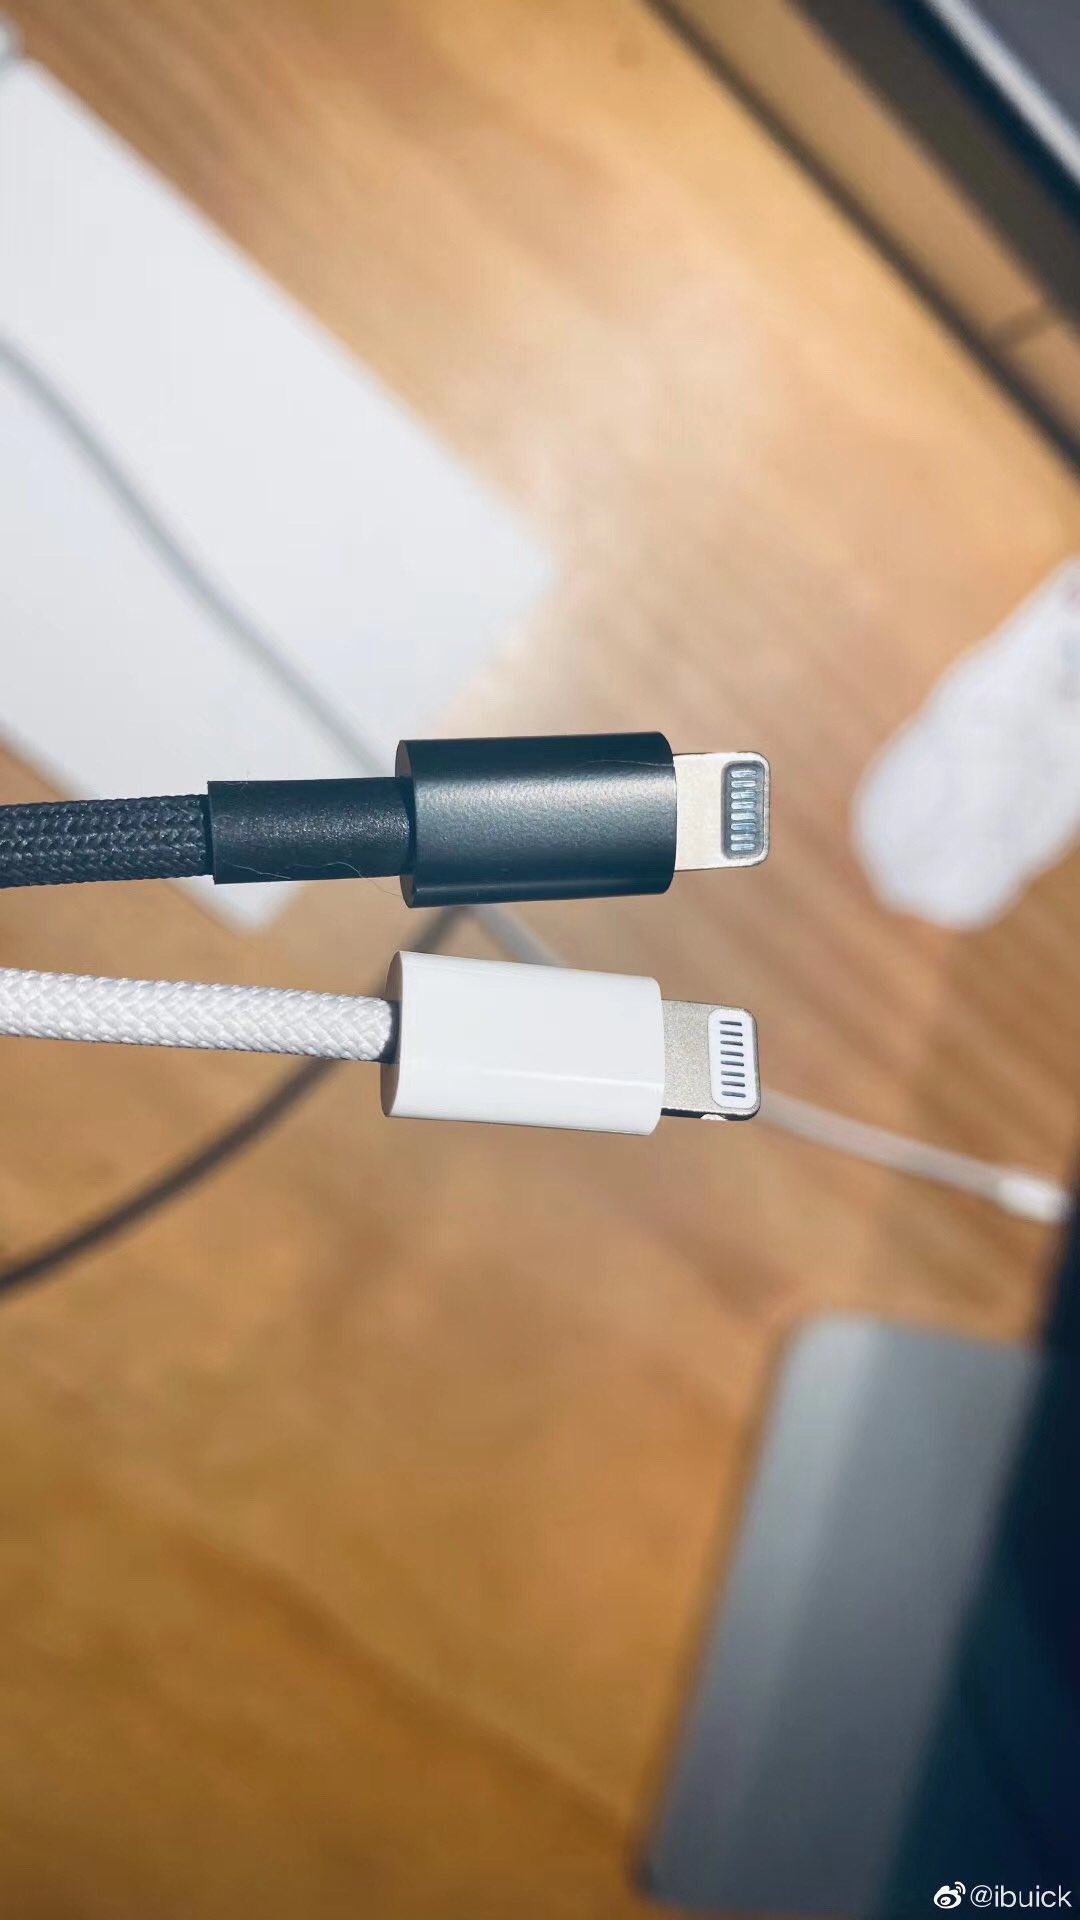 Photos of Apple's Alleged New Braided Lightning Cable for iPhone 12